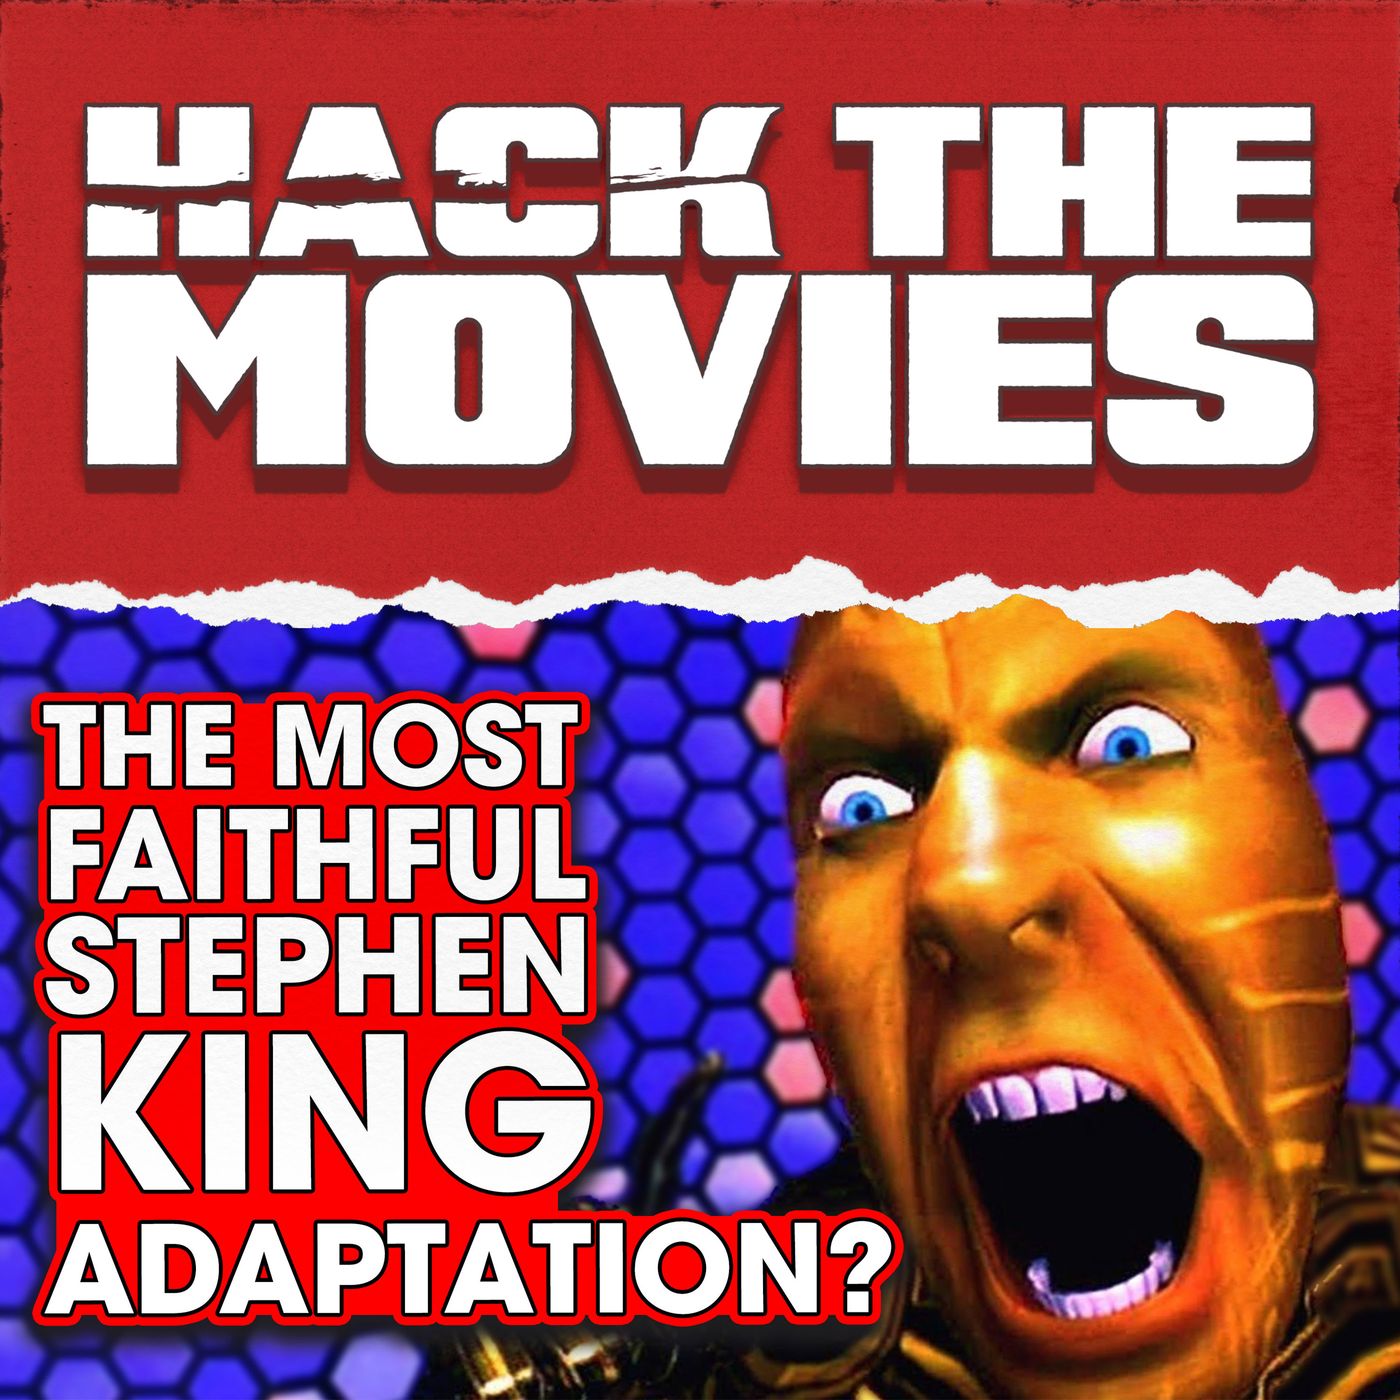 Is The Lawnmower Man The Most Faithful Stephen King Adaptation? - Talking About Tapes (#290)